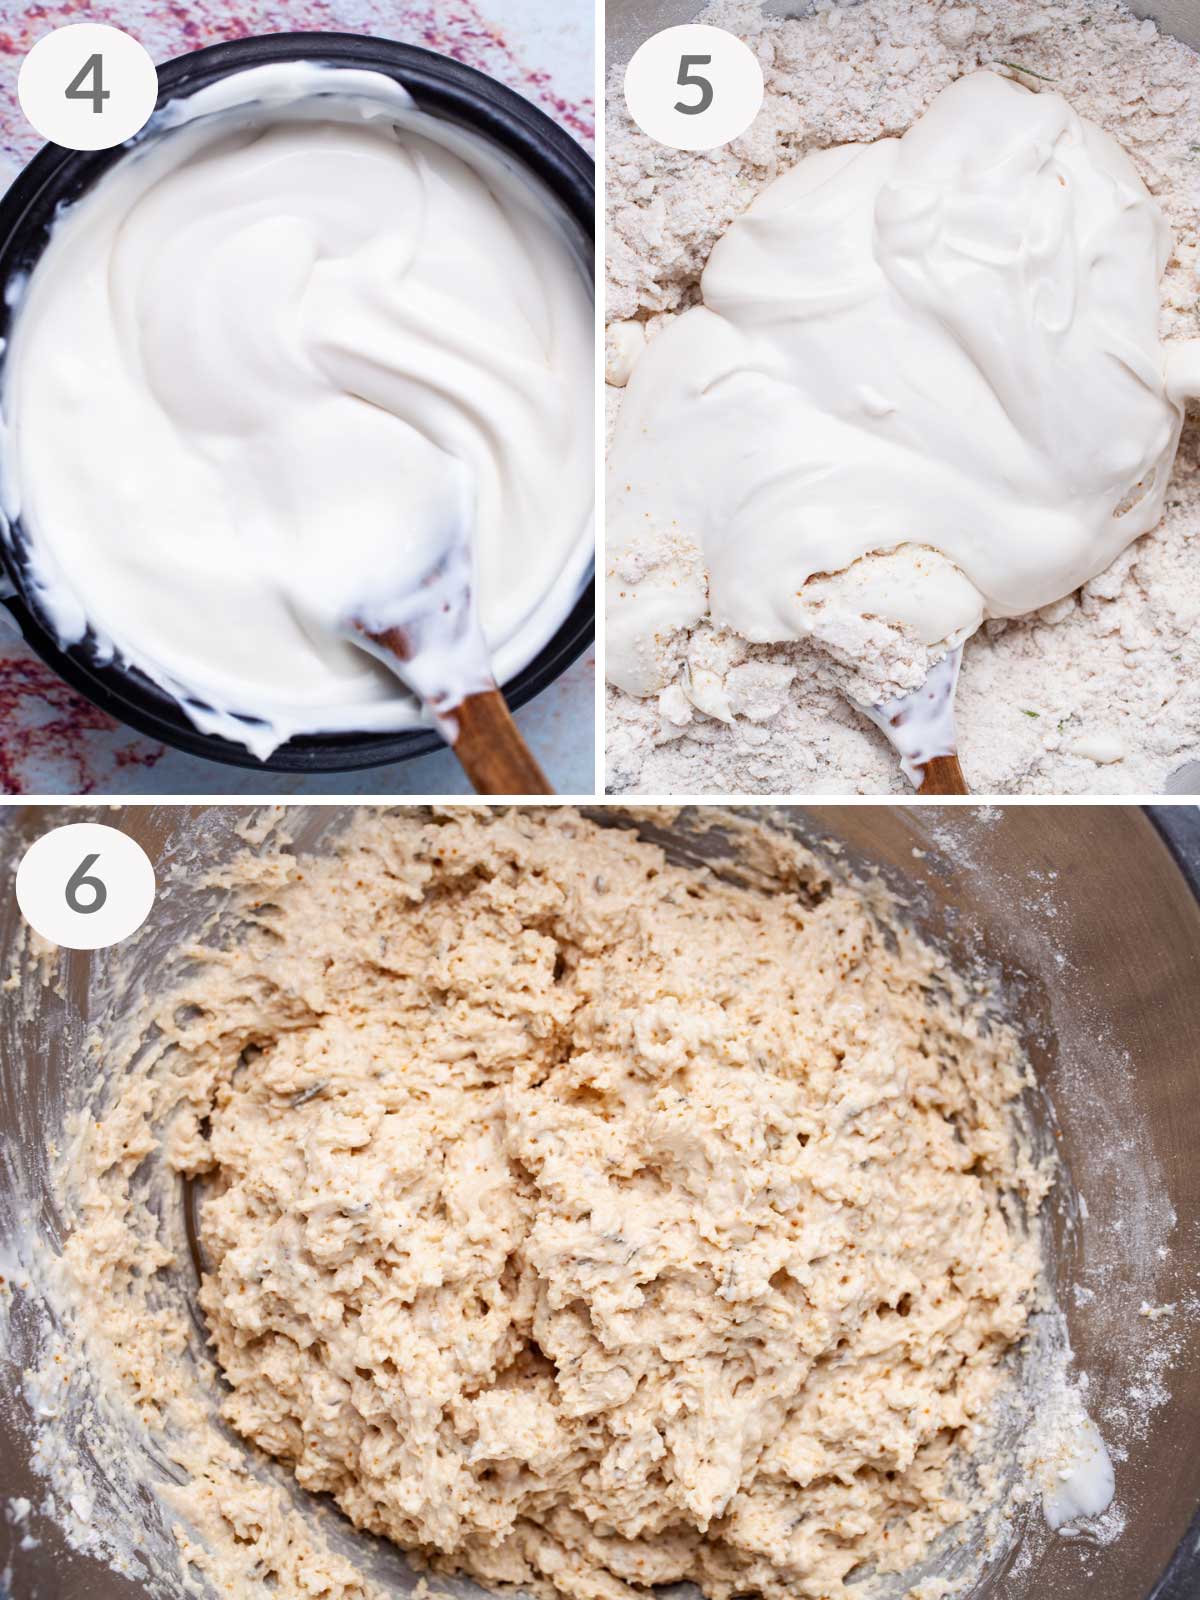 A series of steps showing how to make batter fro gluten-free drop biscuits.